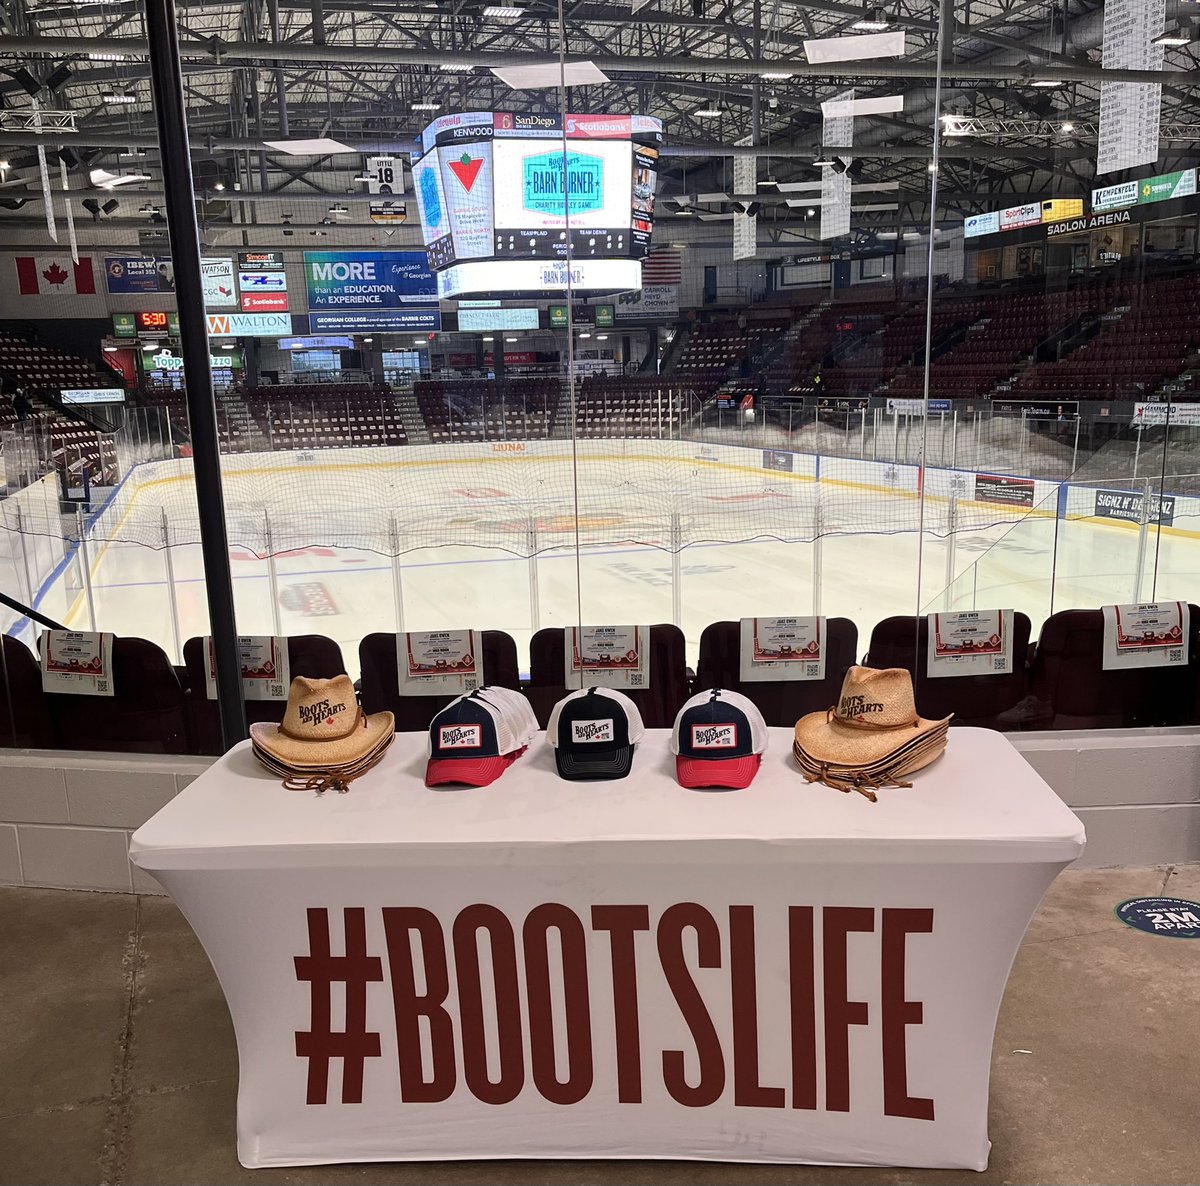 Stop by the #BootsLife Booth located at the West Entrance to get yourself some @bootsandhearts swag before the weekend! 👢🎉